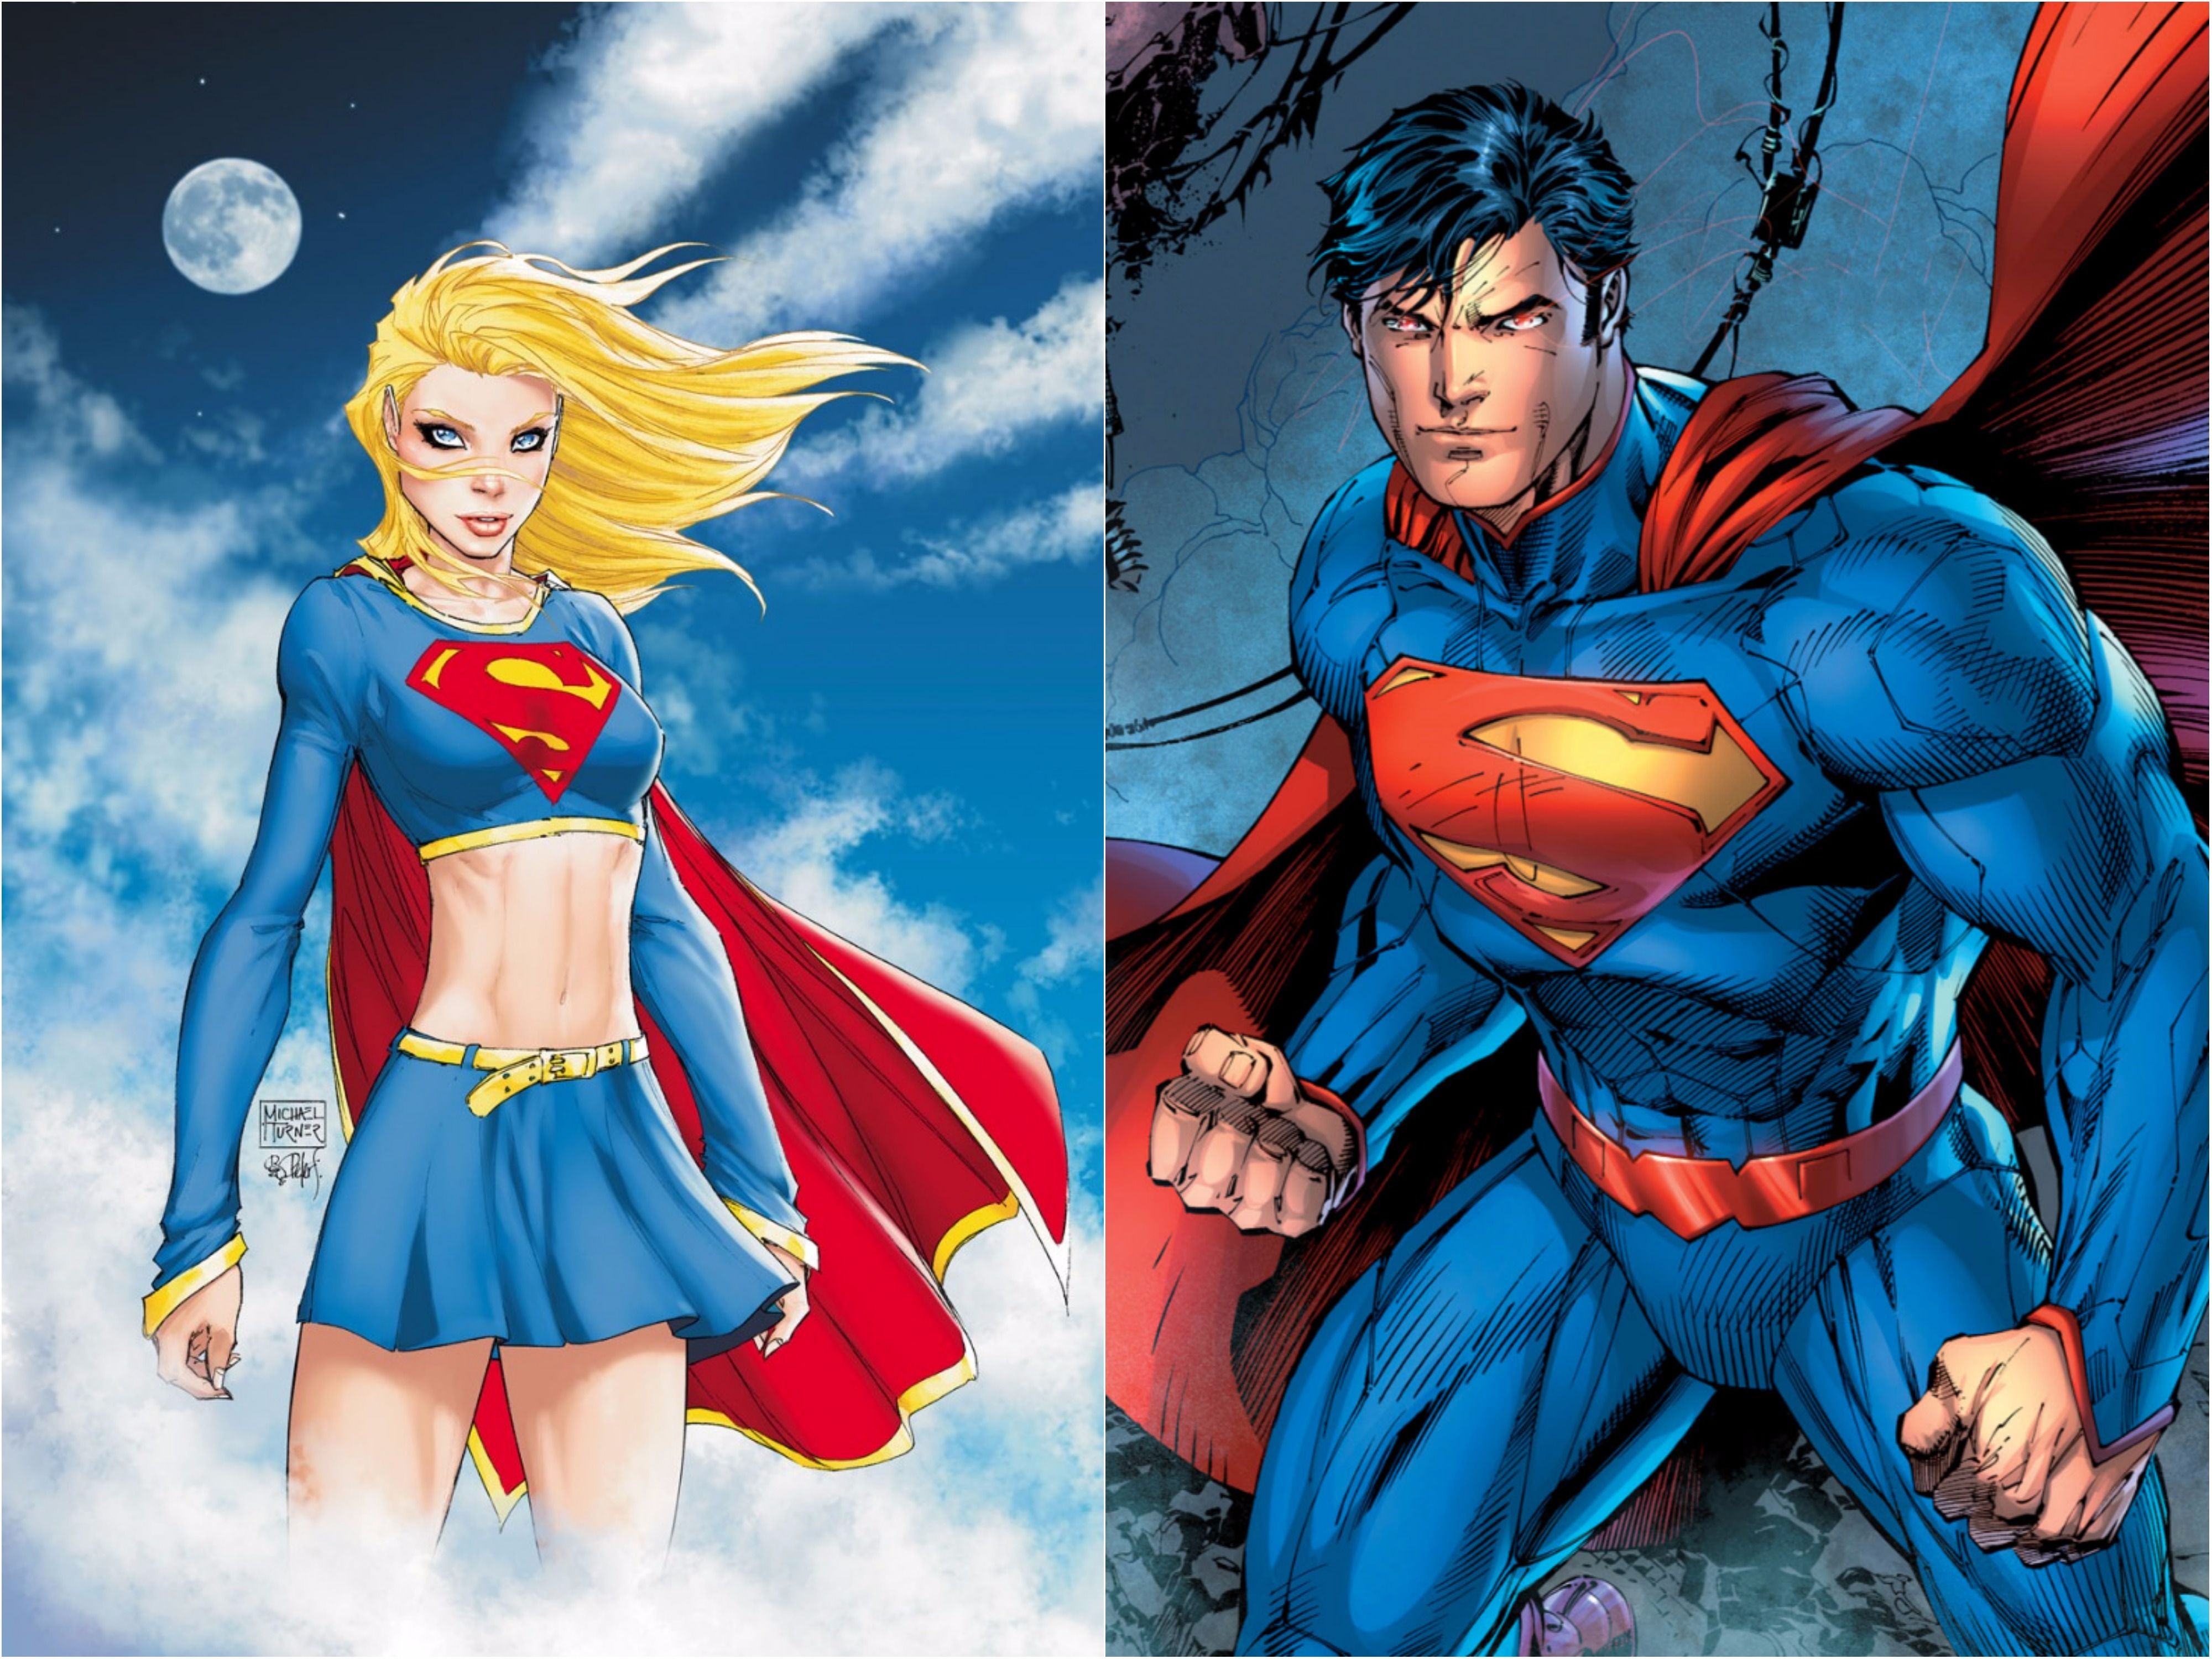 Superman and Supergirl